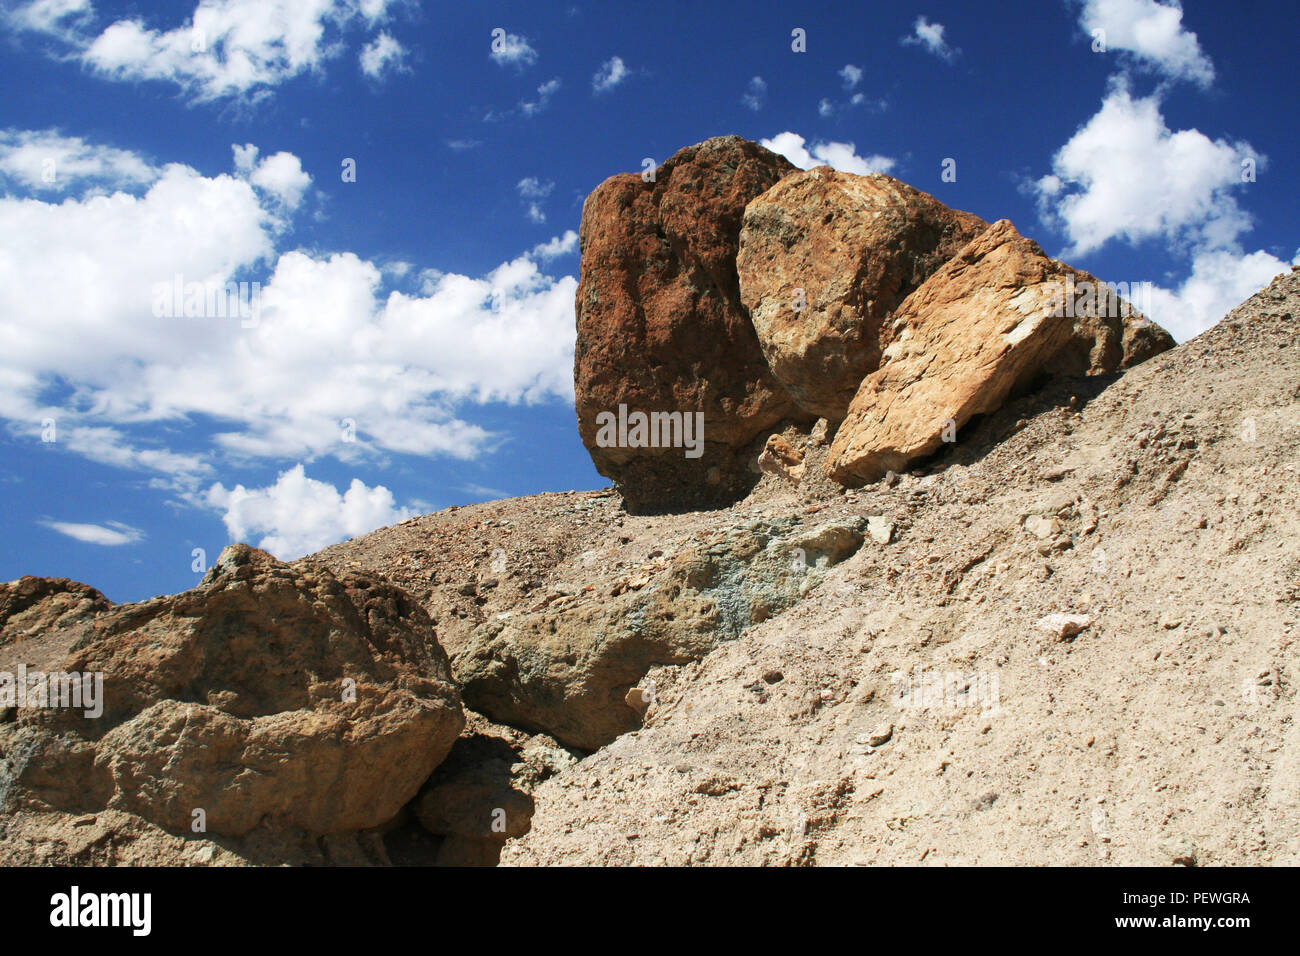 Rocks and erosion, Geology of Death Valley National Park, Death Valley, California, USA Stock Photo